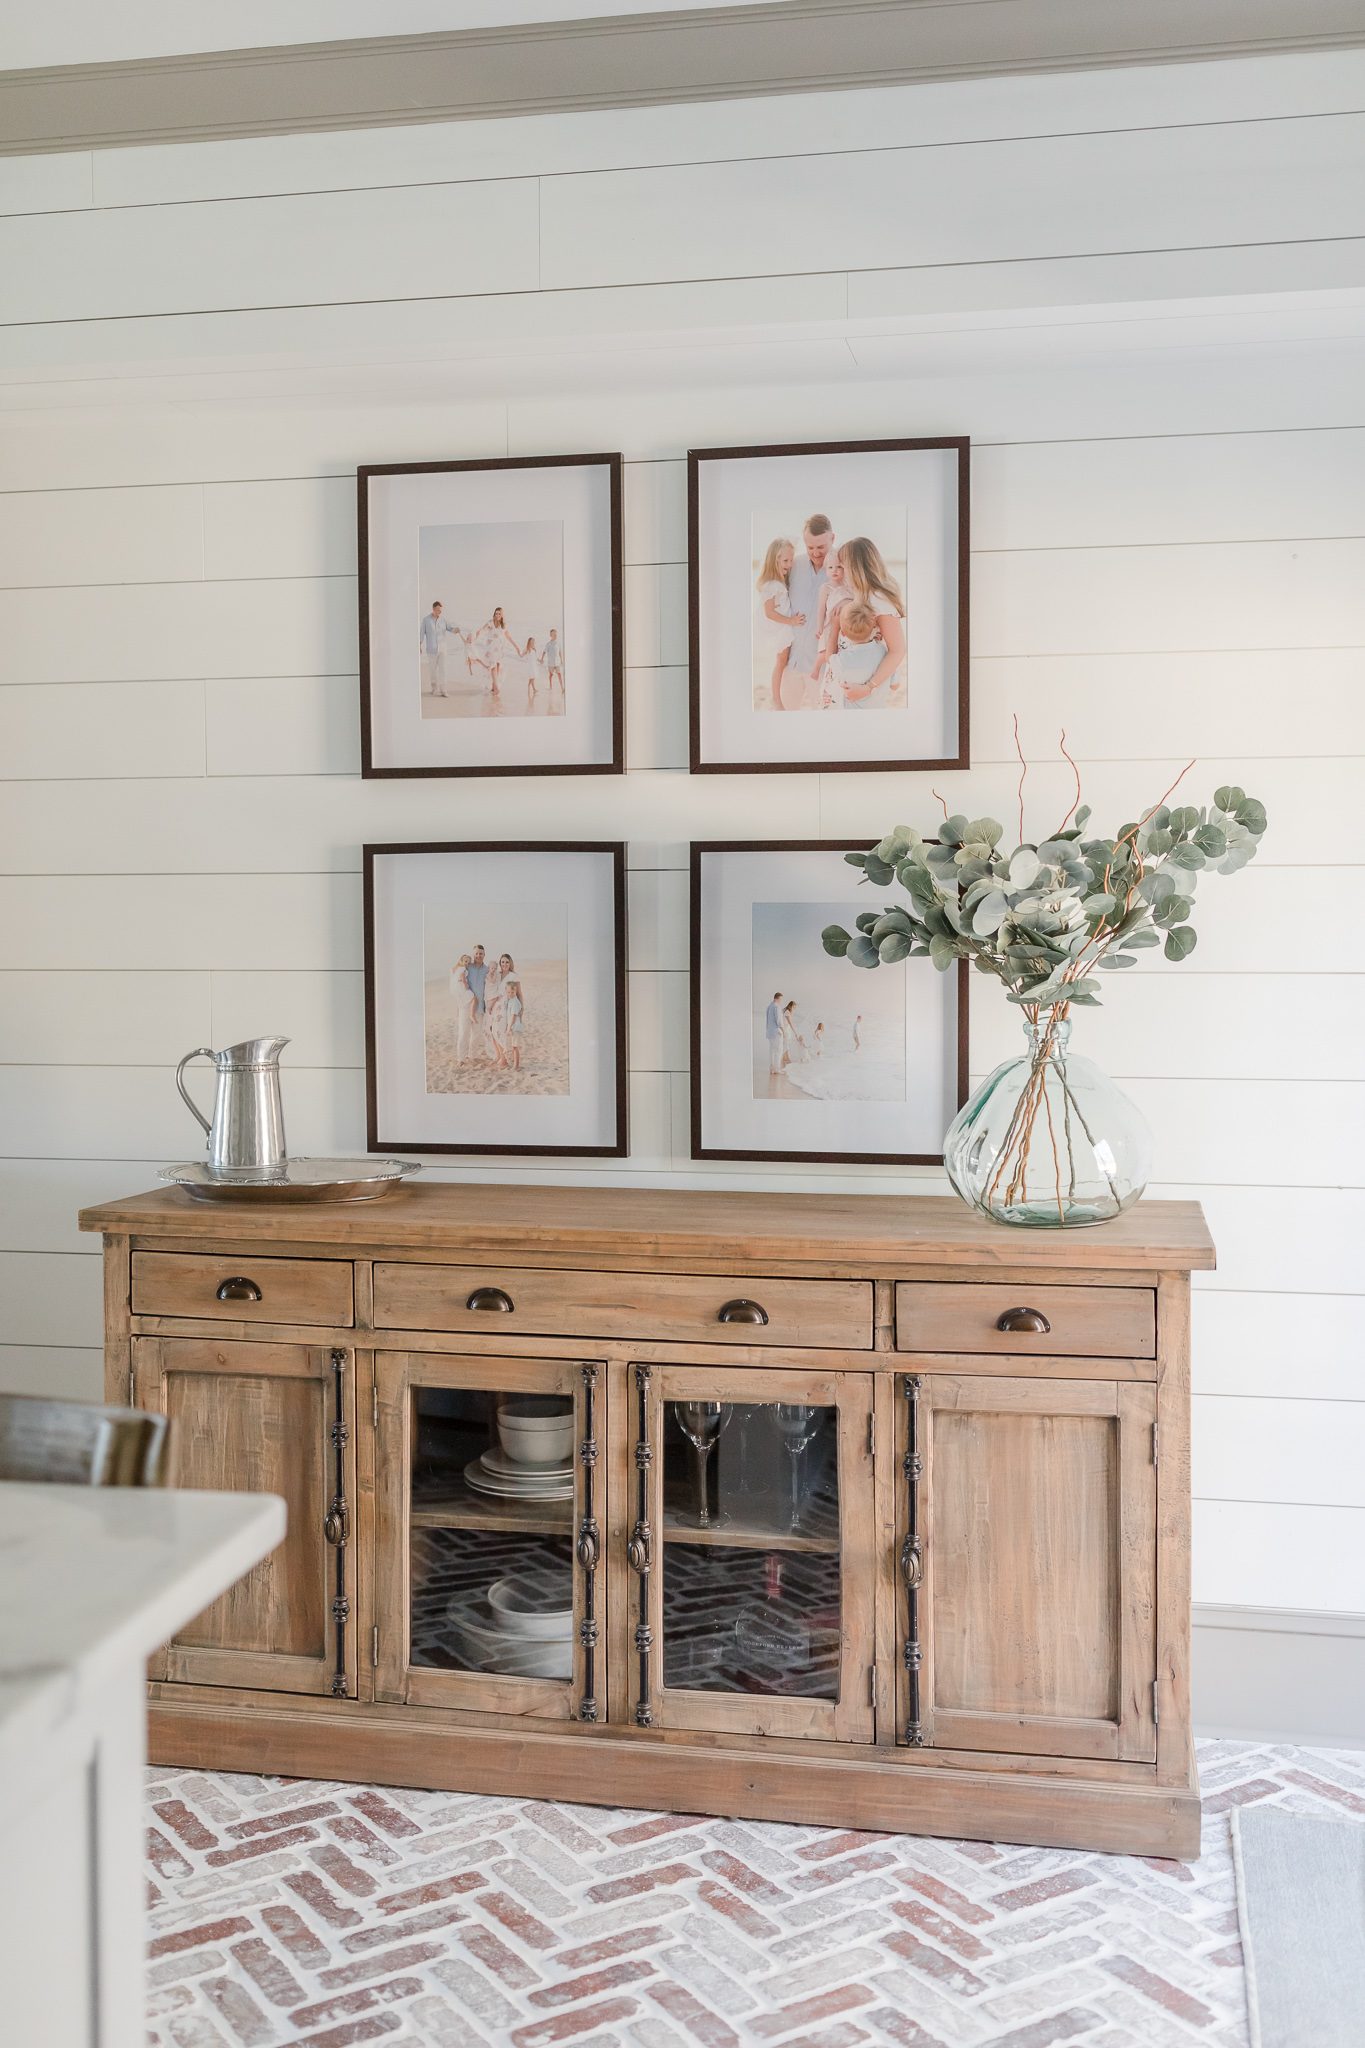 Family photos in picture frames hanging on walls